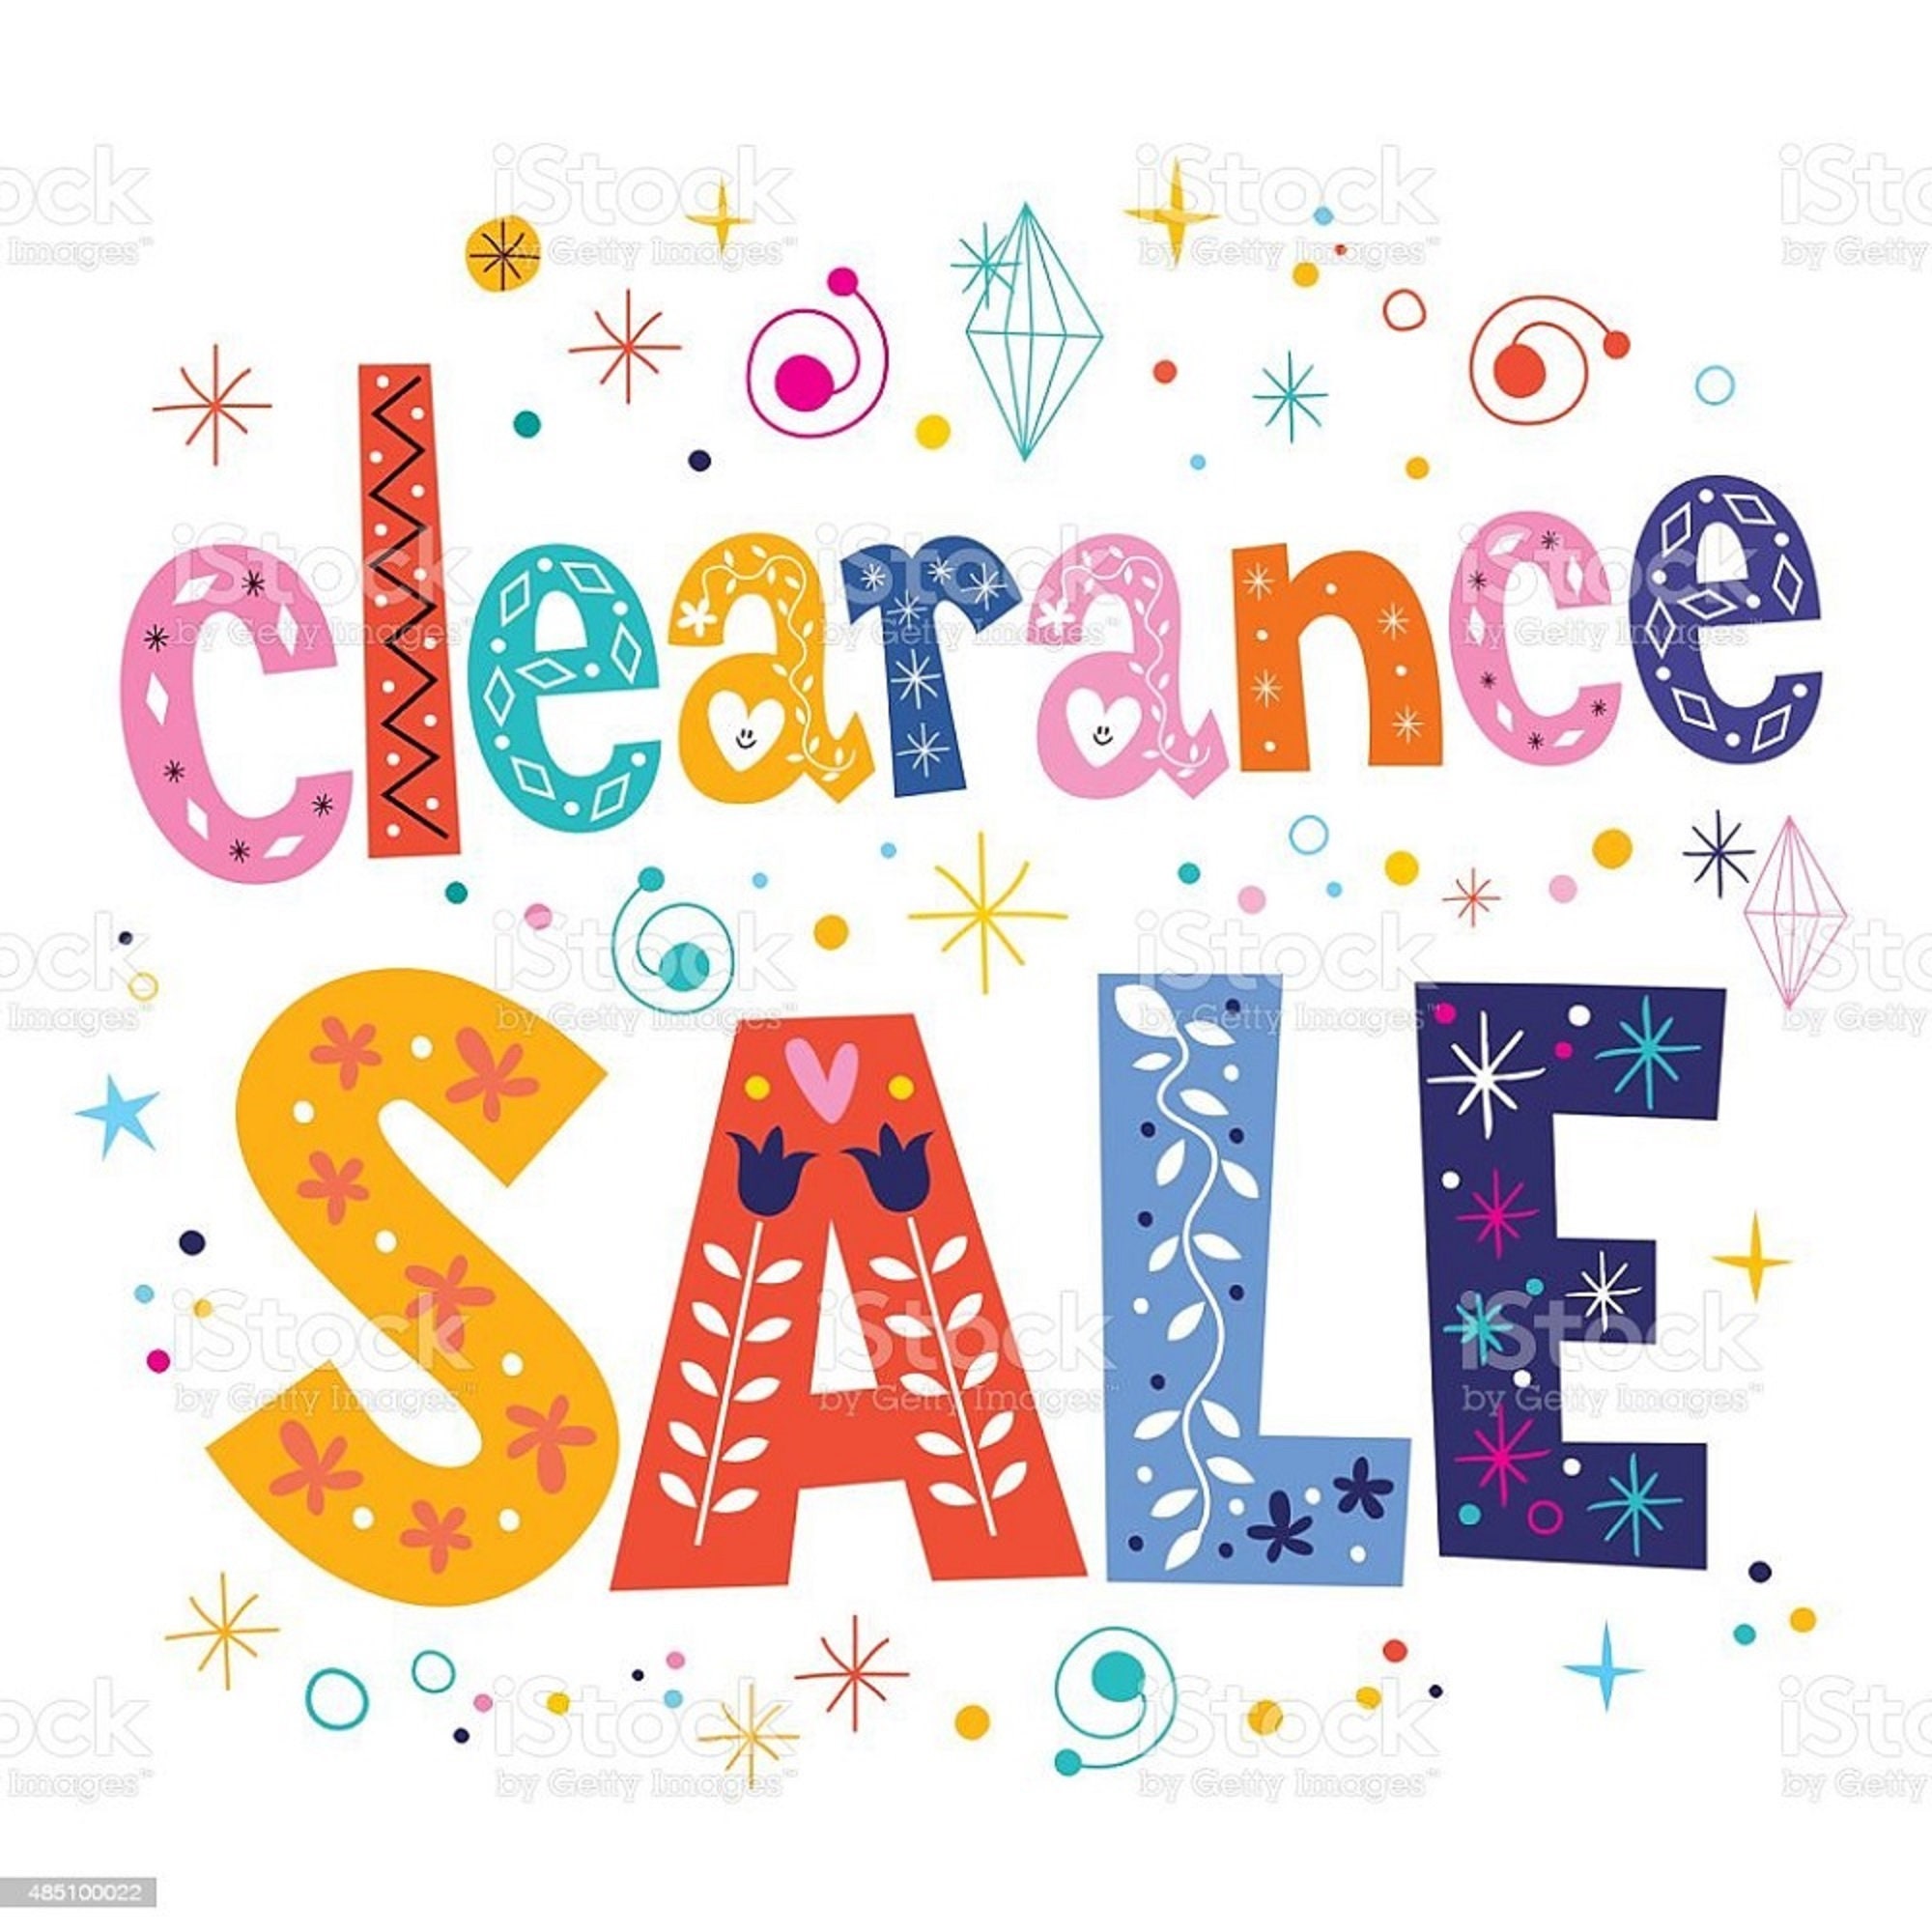 CLEARANCE ITEMS All Things Must Go Discounted. Overstock. Sale